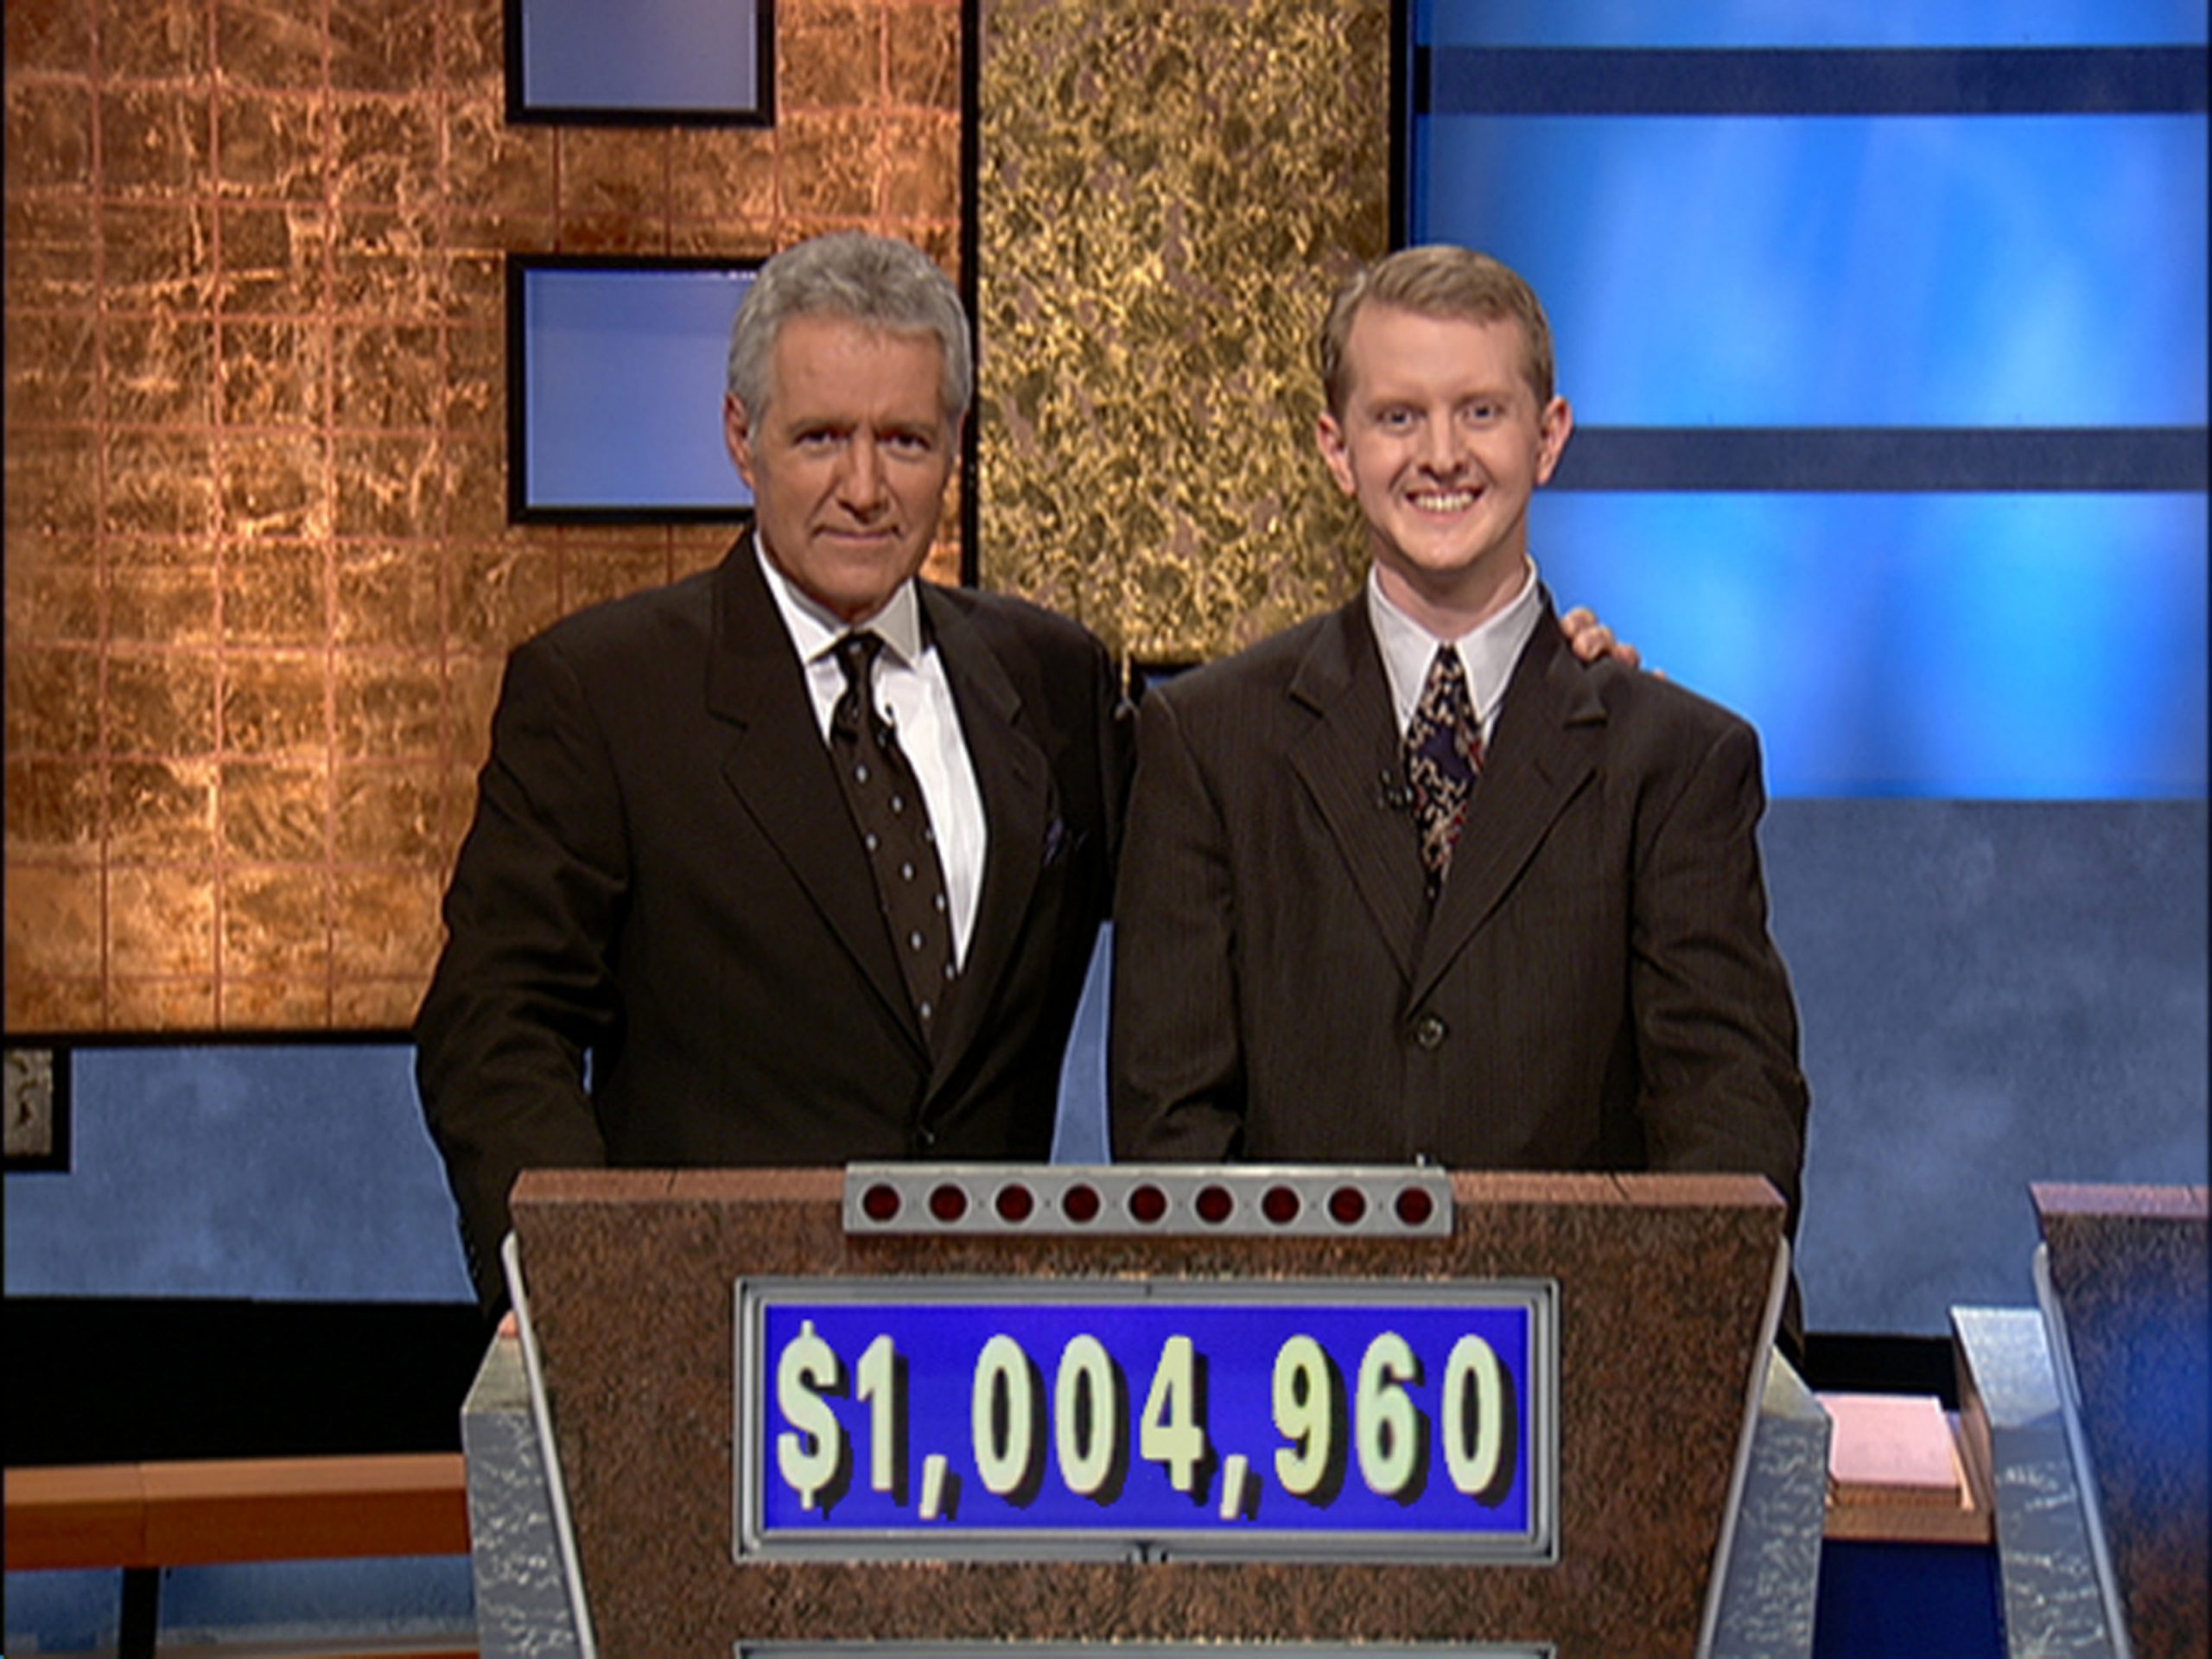 Late 'Jeopardy!' host Alex Trebek and the quiz show's winningest contestant Ken Jennings in 2004.